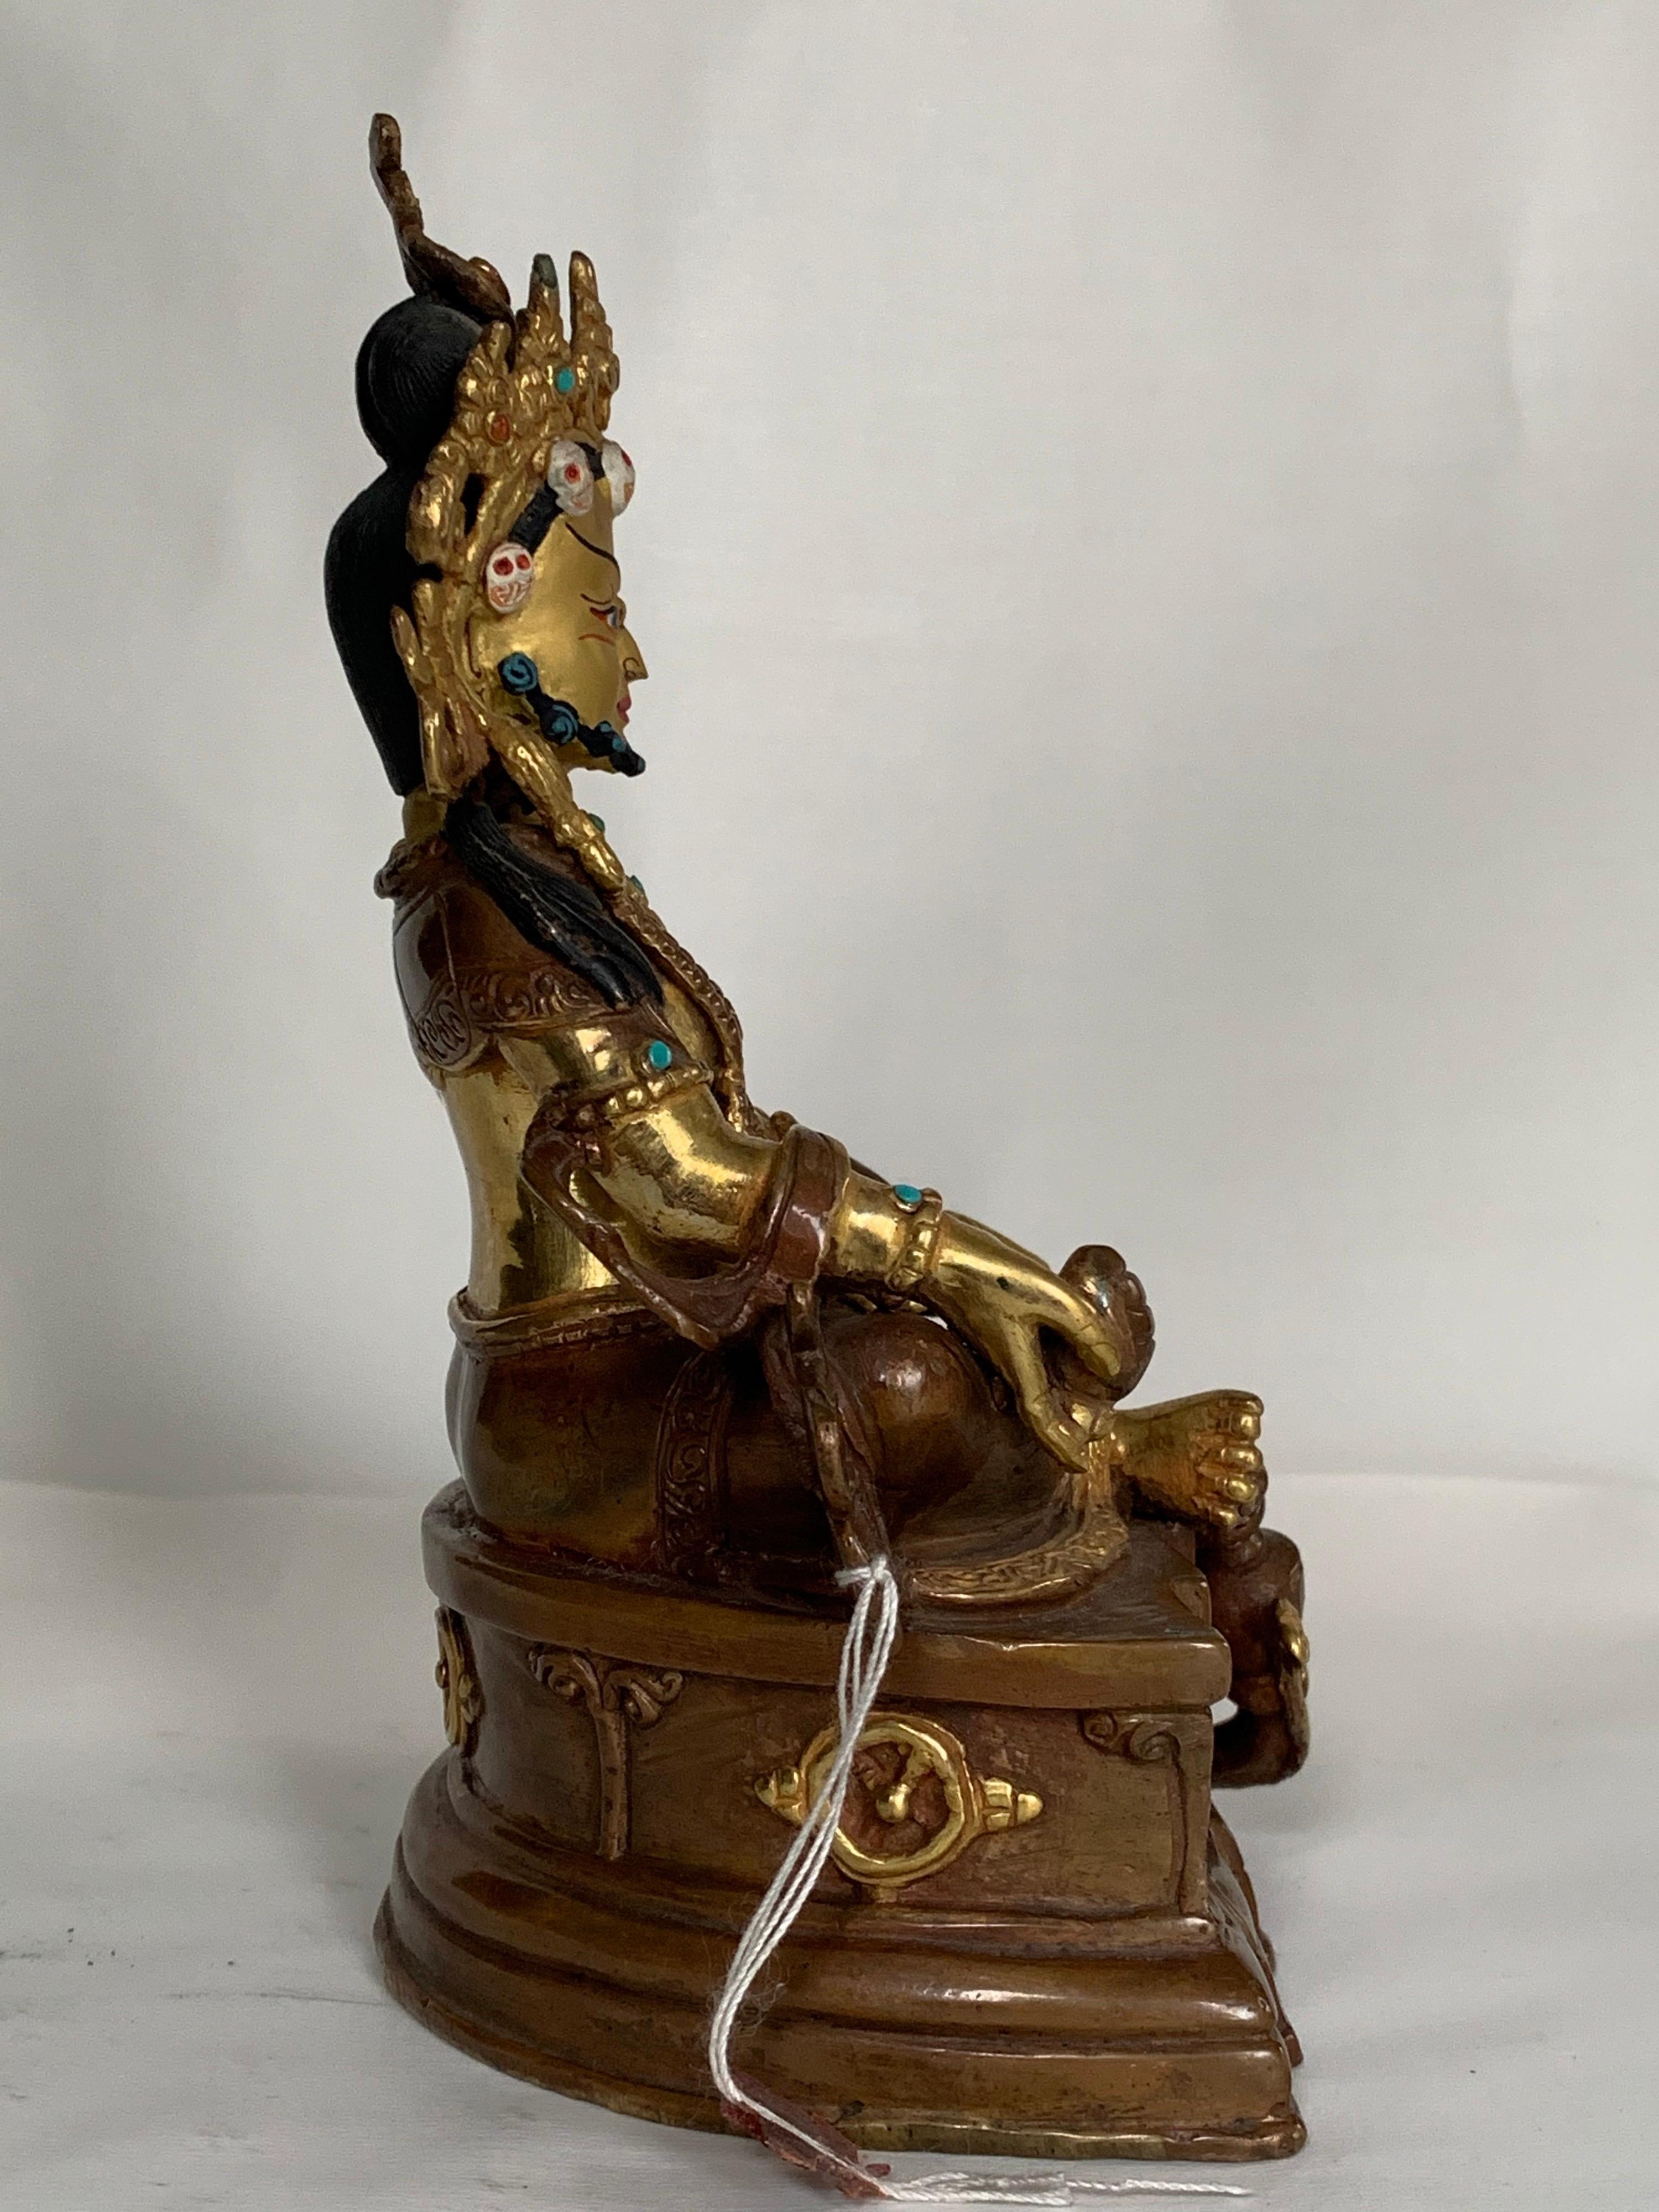 This statue is handcrafted by lost wax process which is one of the ancient process of metal craft. Kubera is seated in easy pose with one hand holding a jewel and another a mongoose. Kubera is also known as Jambala or Vaishravana, the deity of